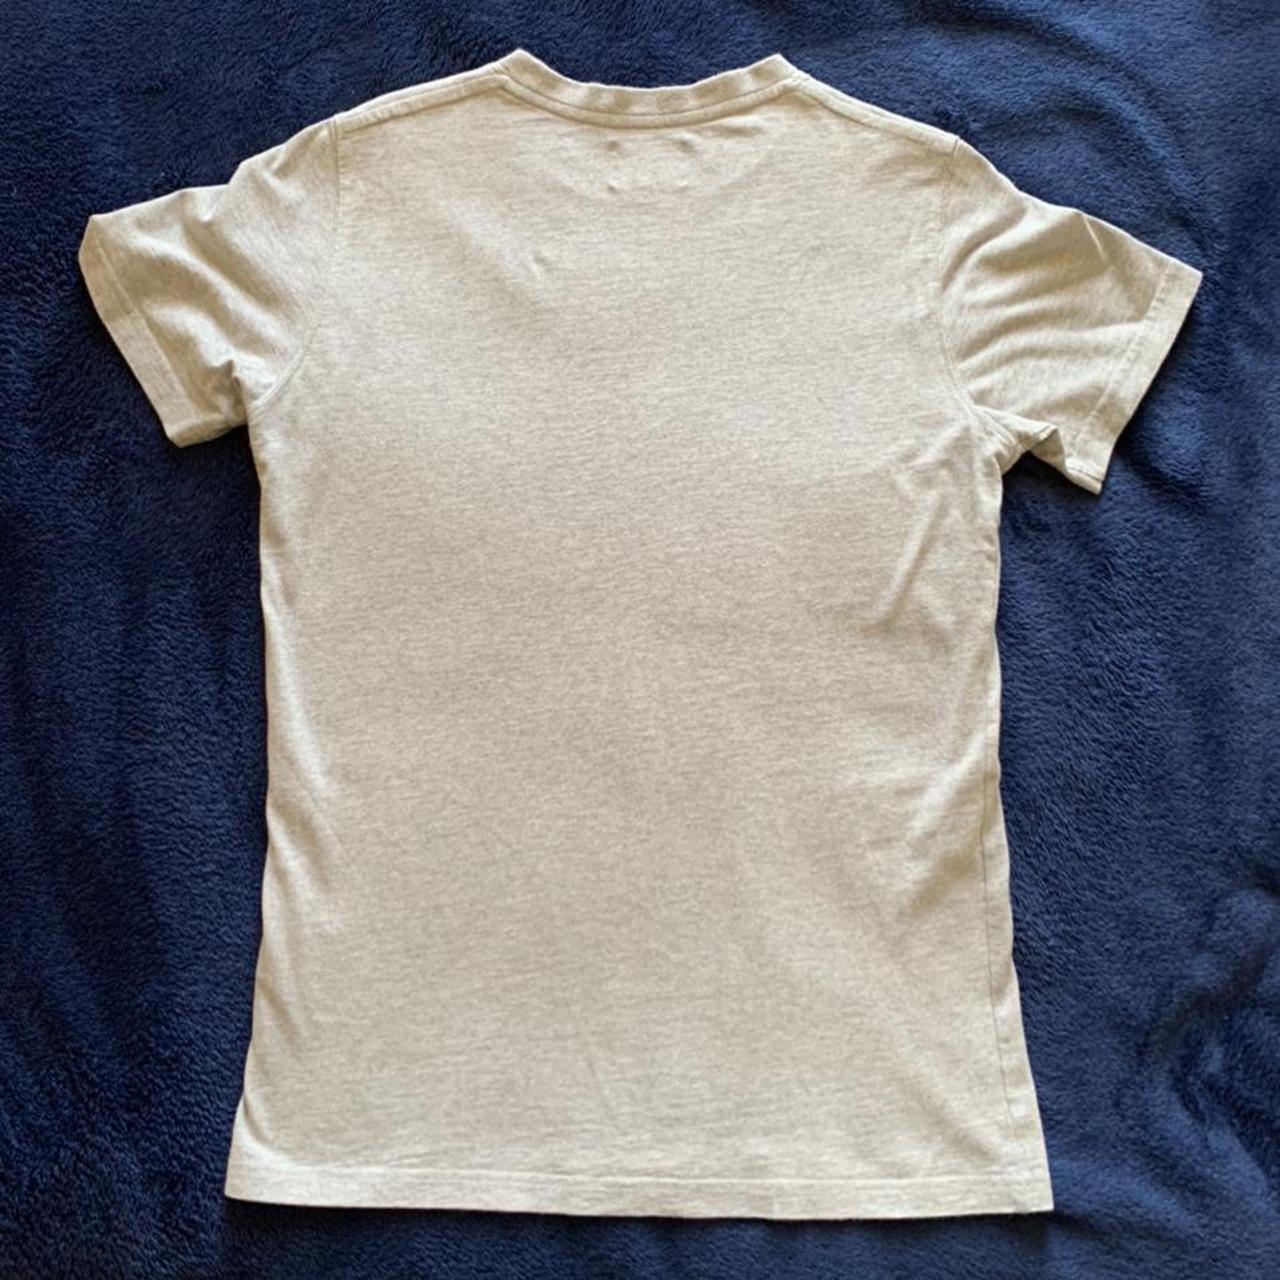 Product Image 2 - Norse Projects Niels Basic T

Size